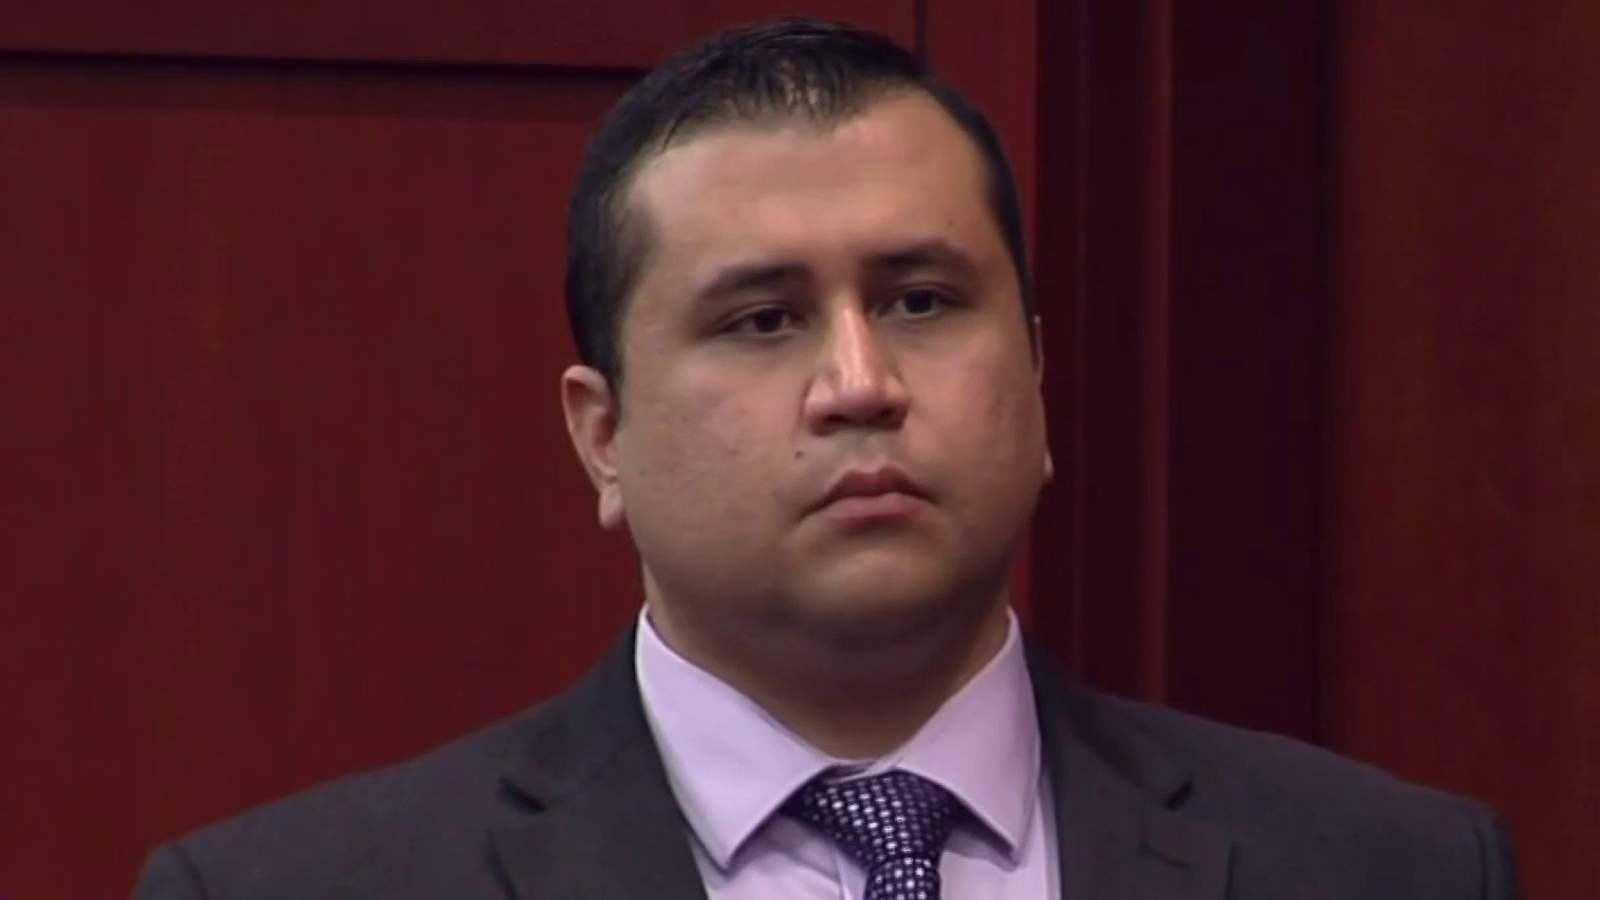 George Zimmerman sues Trayvon Martin family, others for $100 million